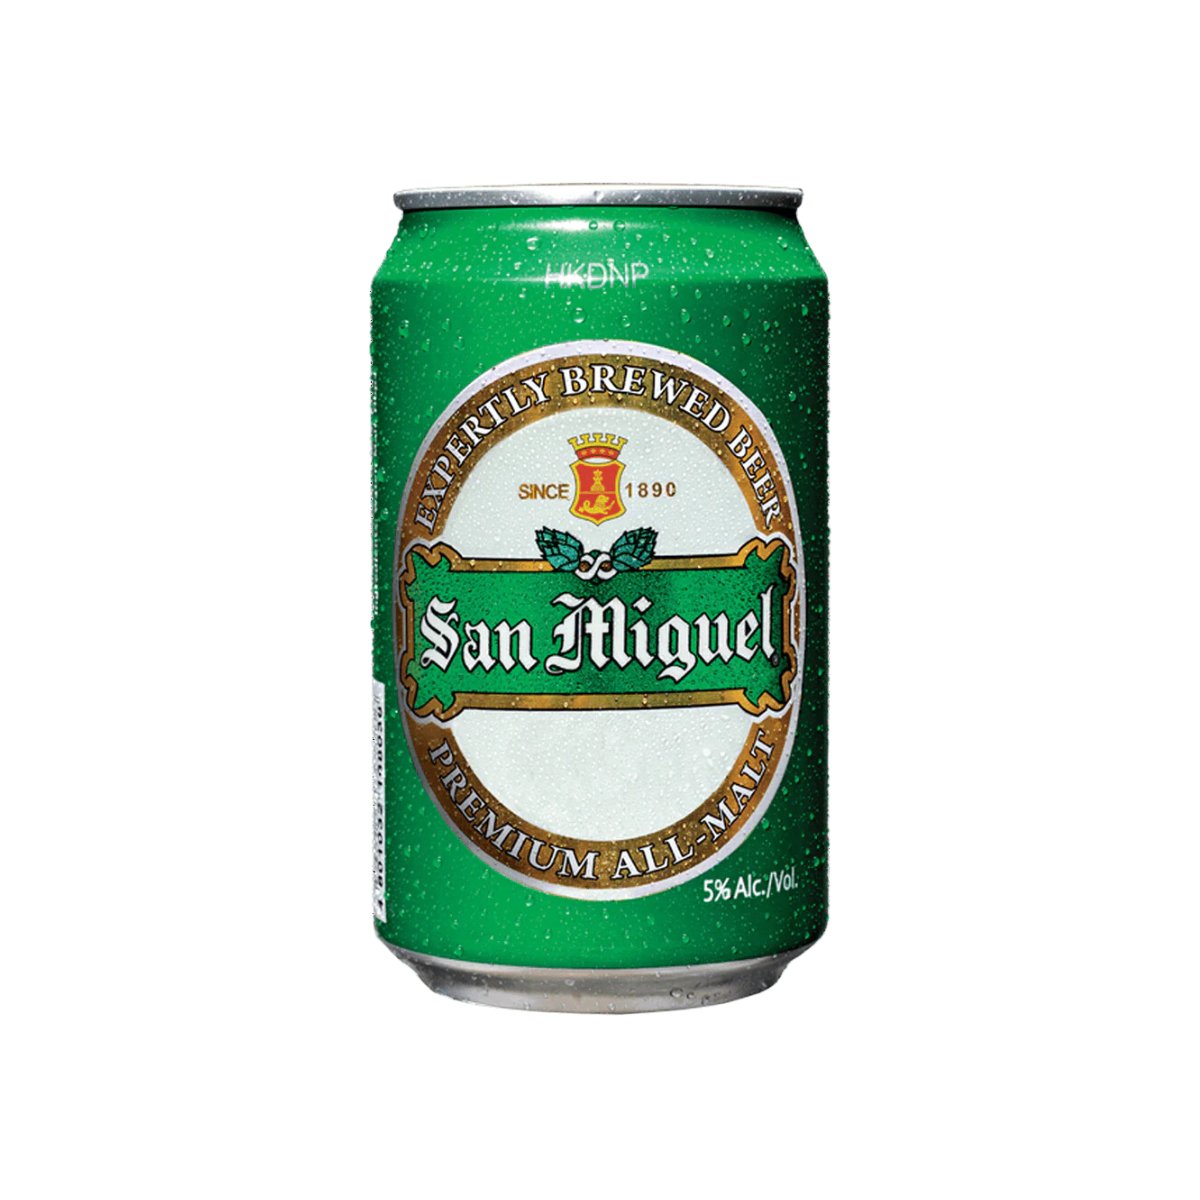 San Miguel Premium All Malt in-can 330ml - Happy Hour